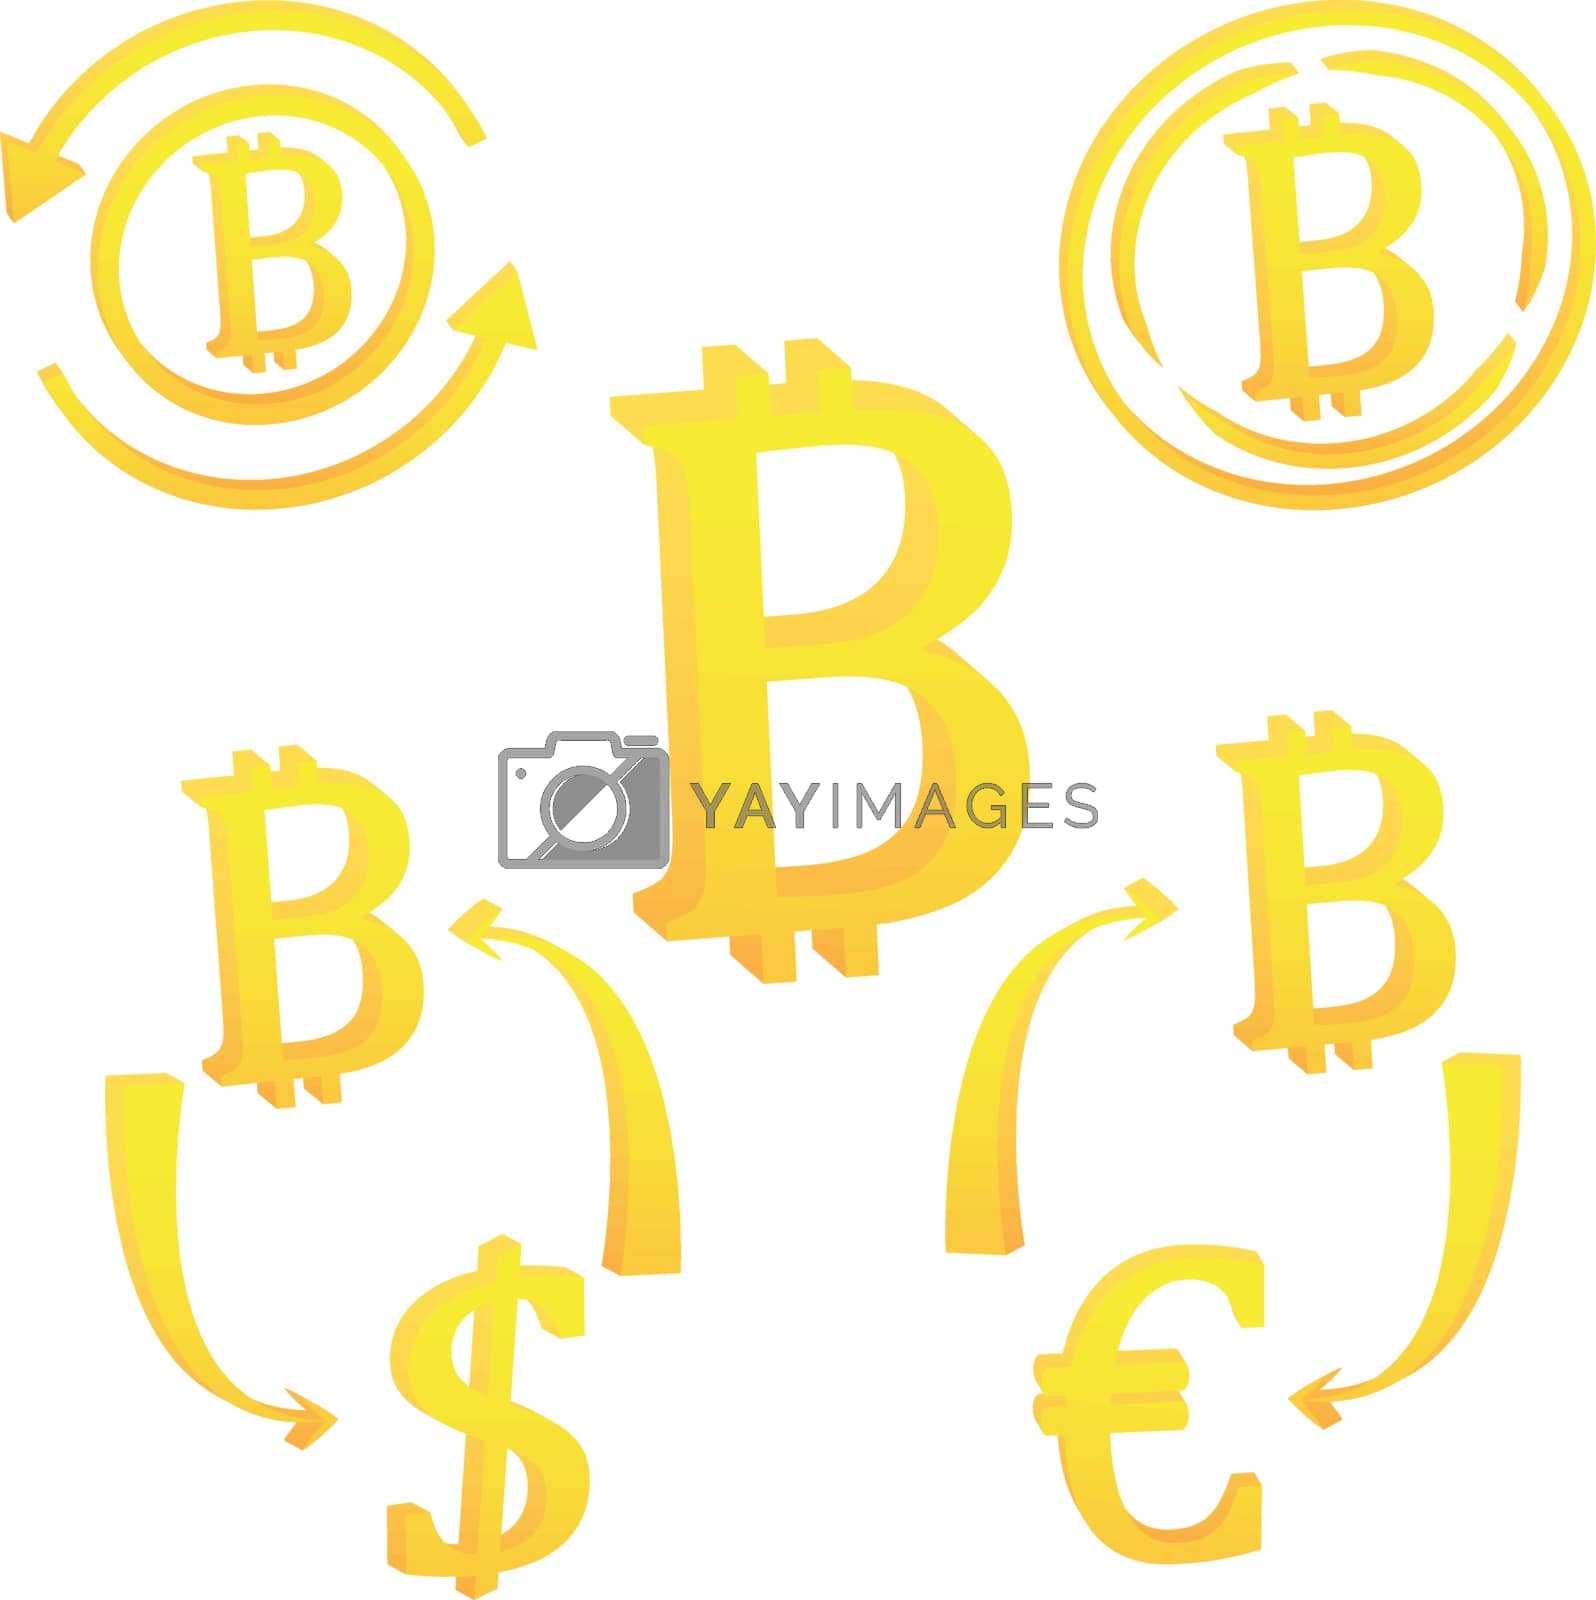 Royalty free image of Bitcoin internet virtual cryptocurrency symbol icon by Olena758